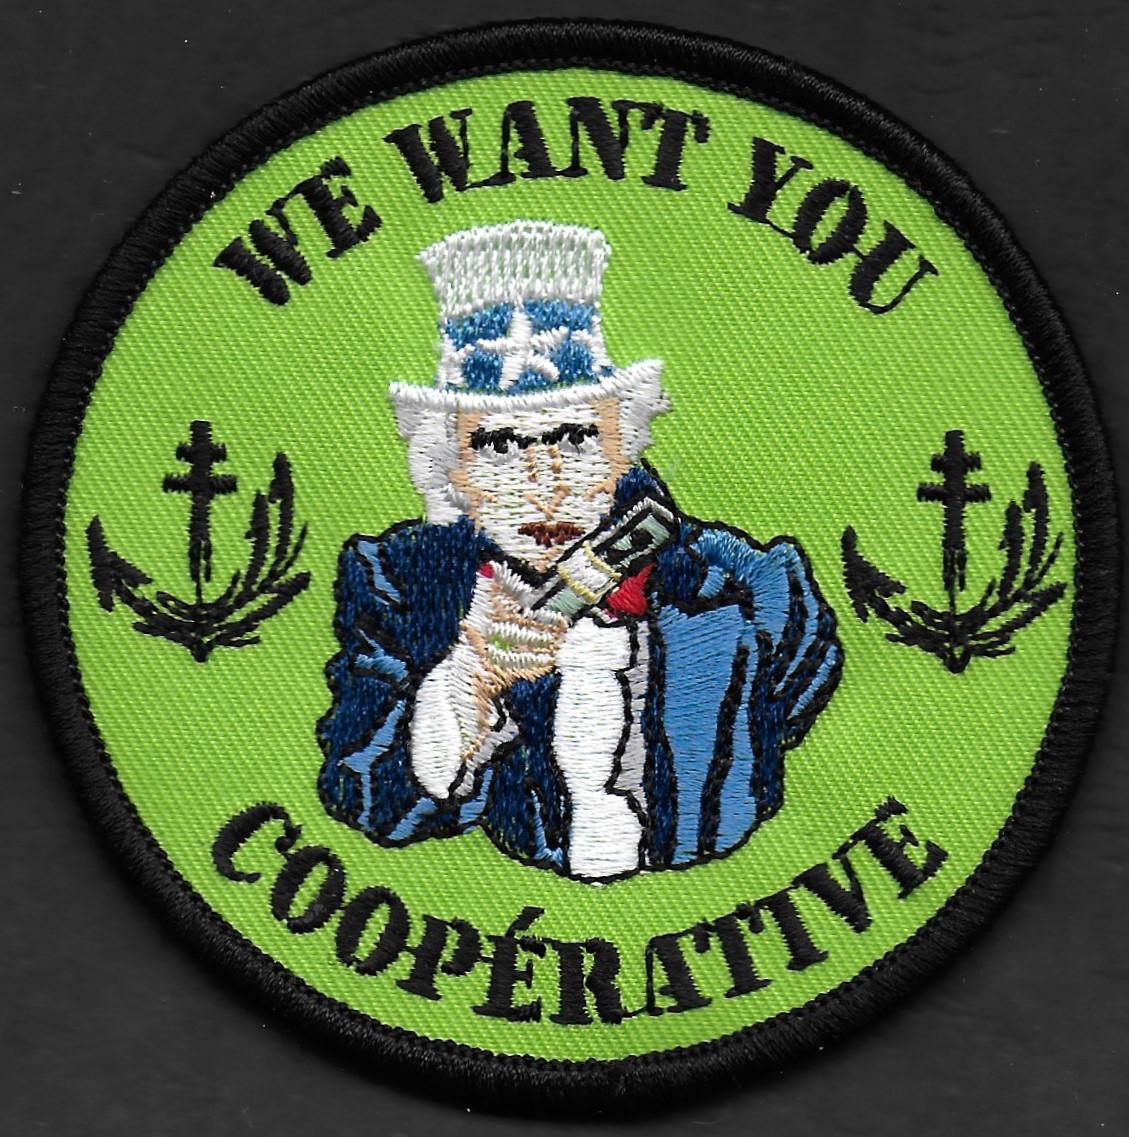 PA Charles de Gaulle - Coopérative - We want you